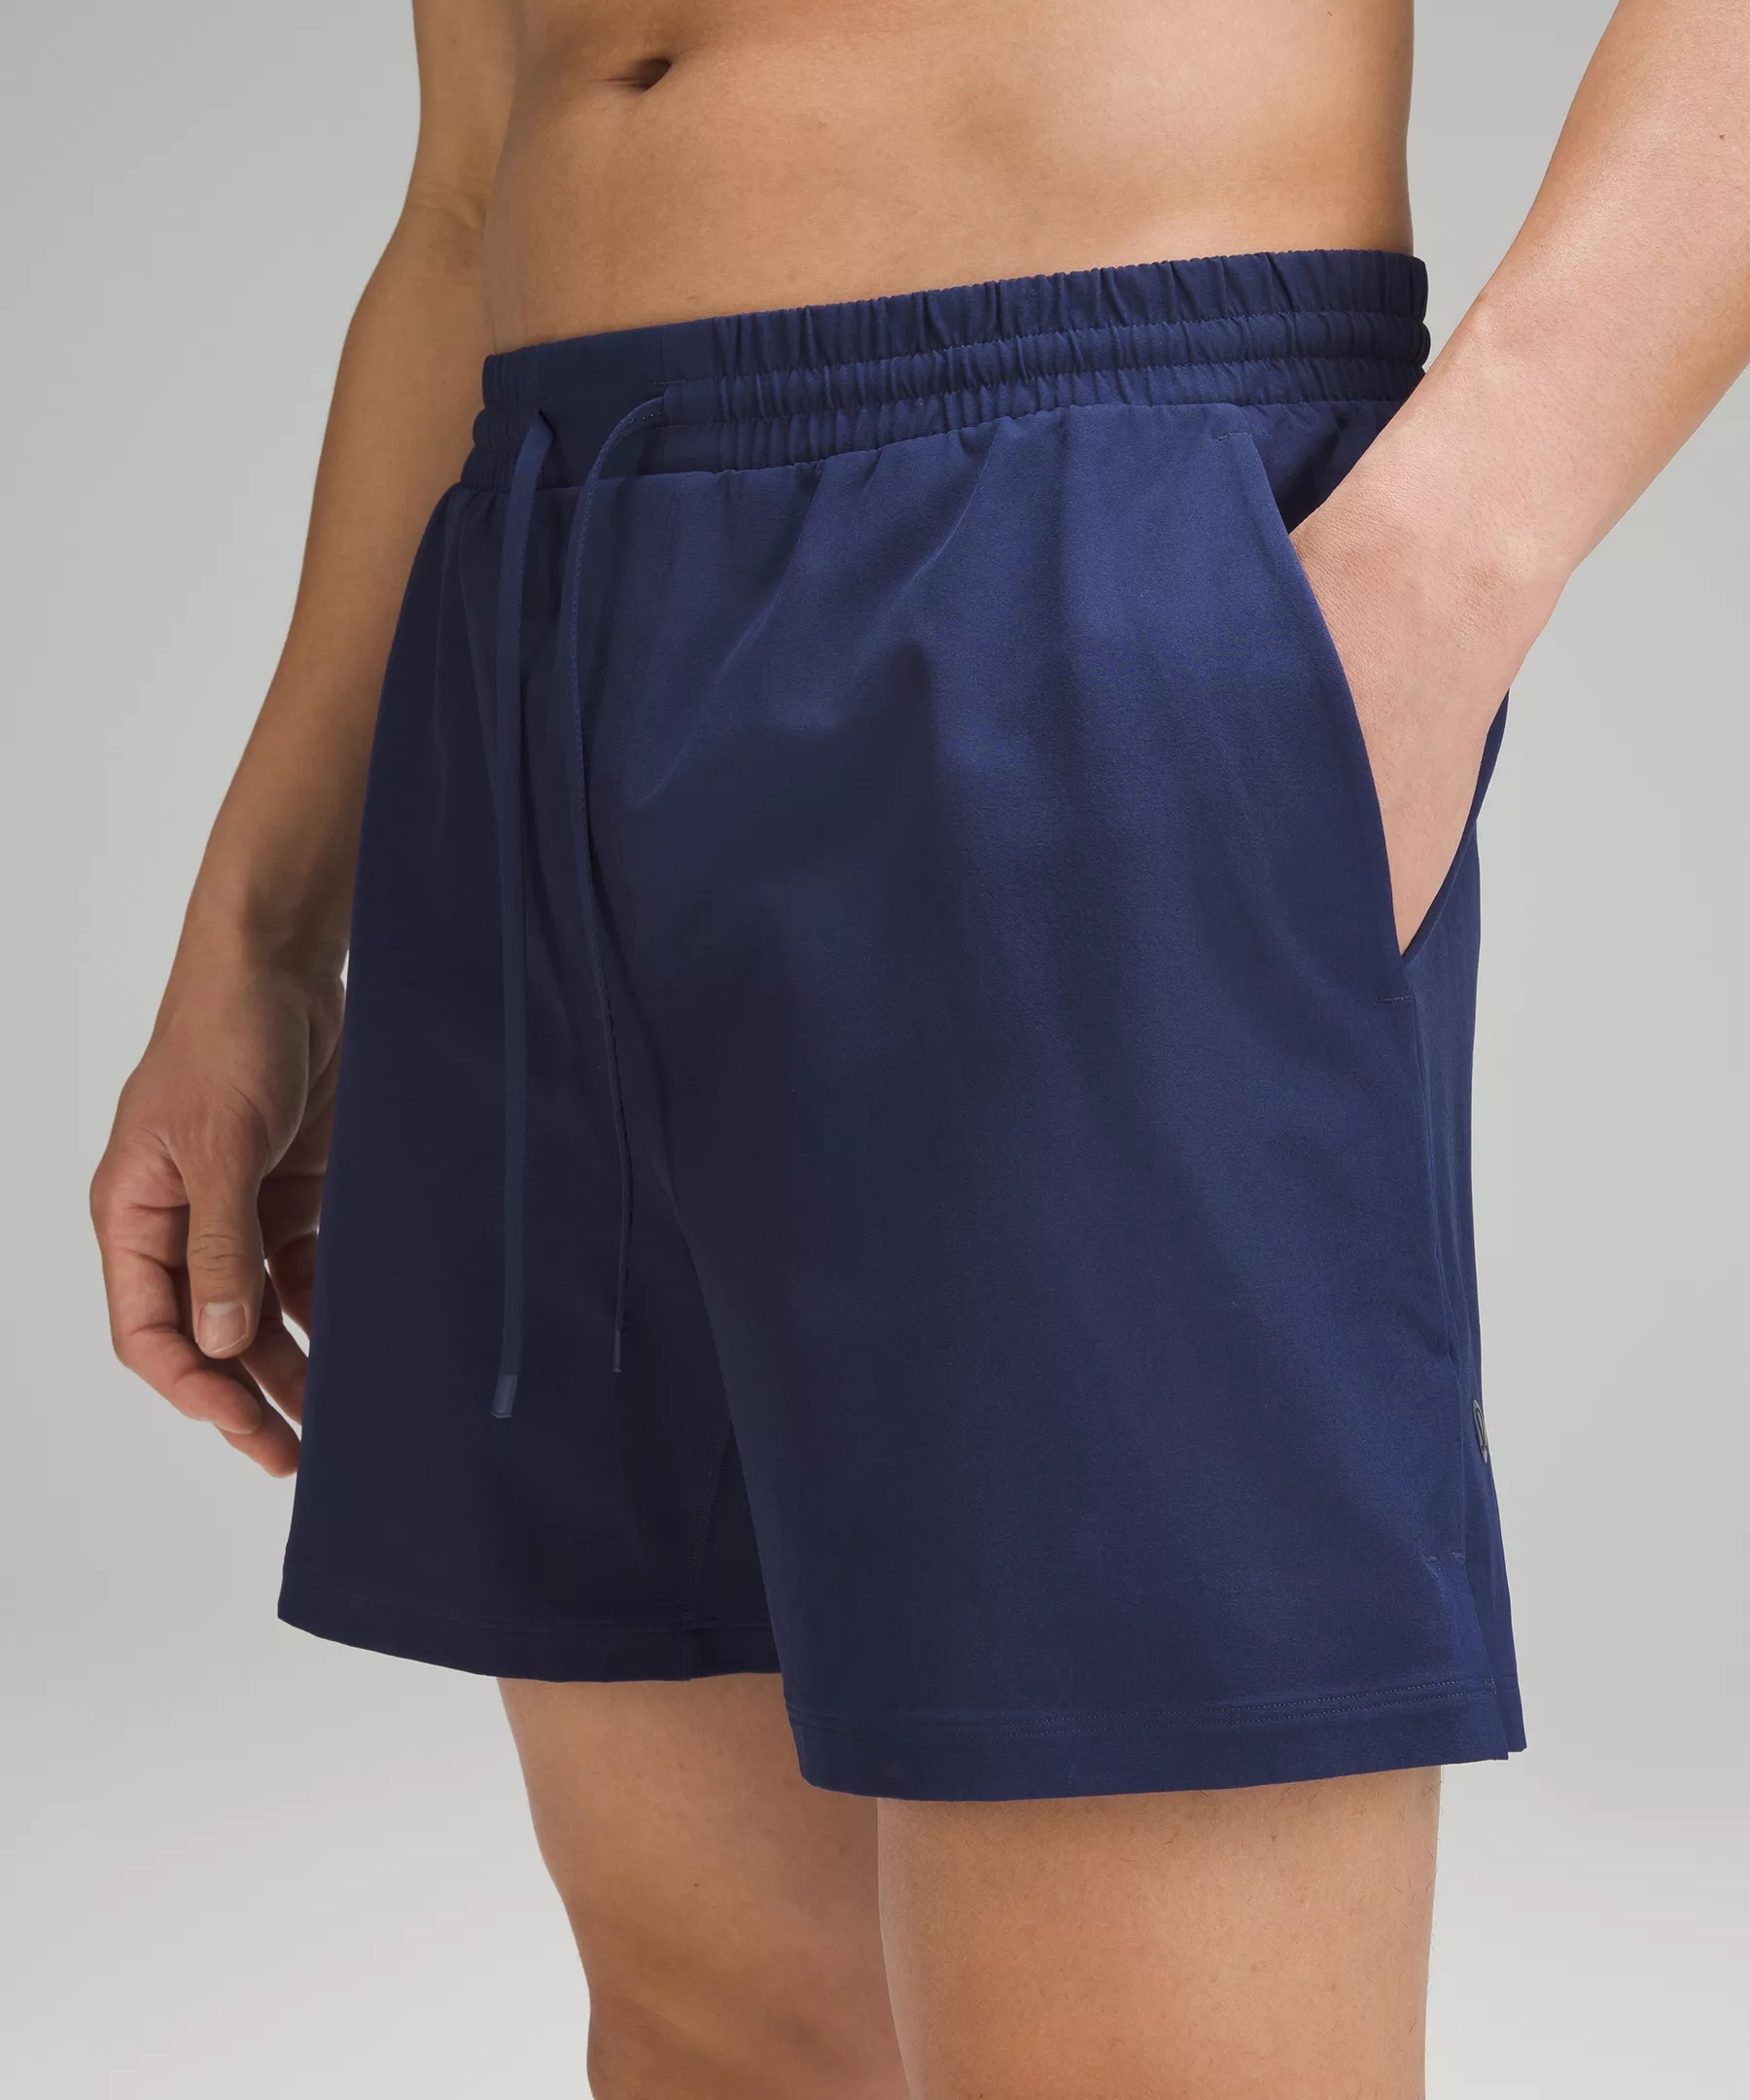 Pool Short 5" *Lined - 5